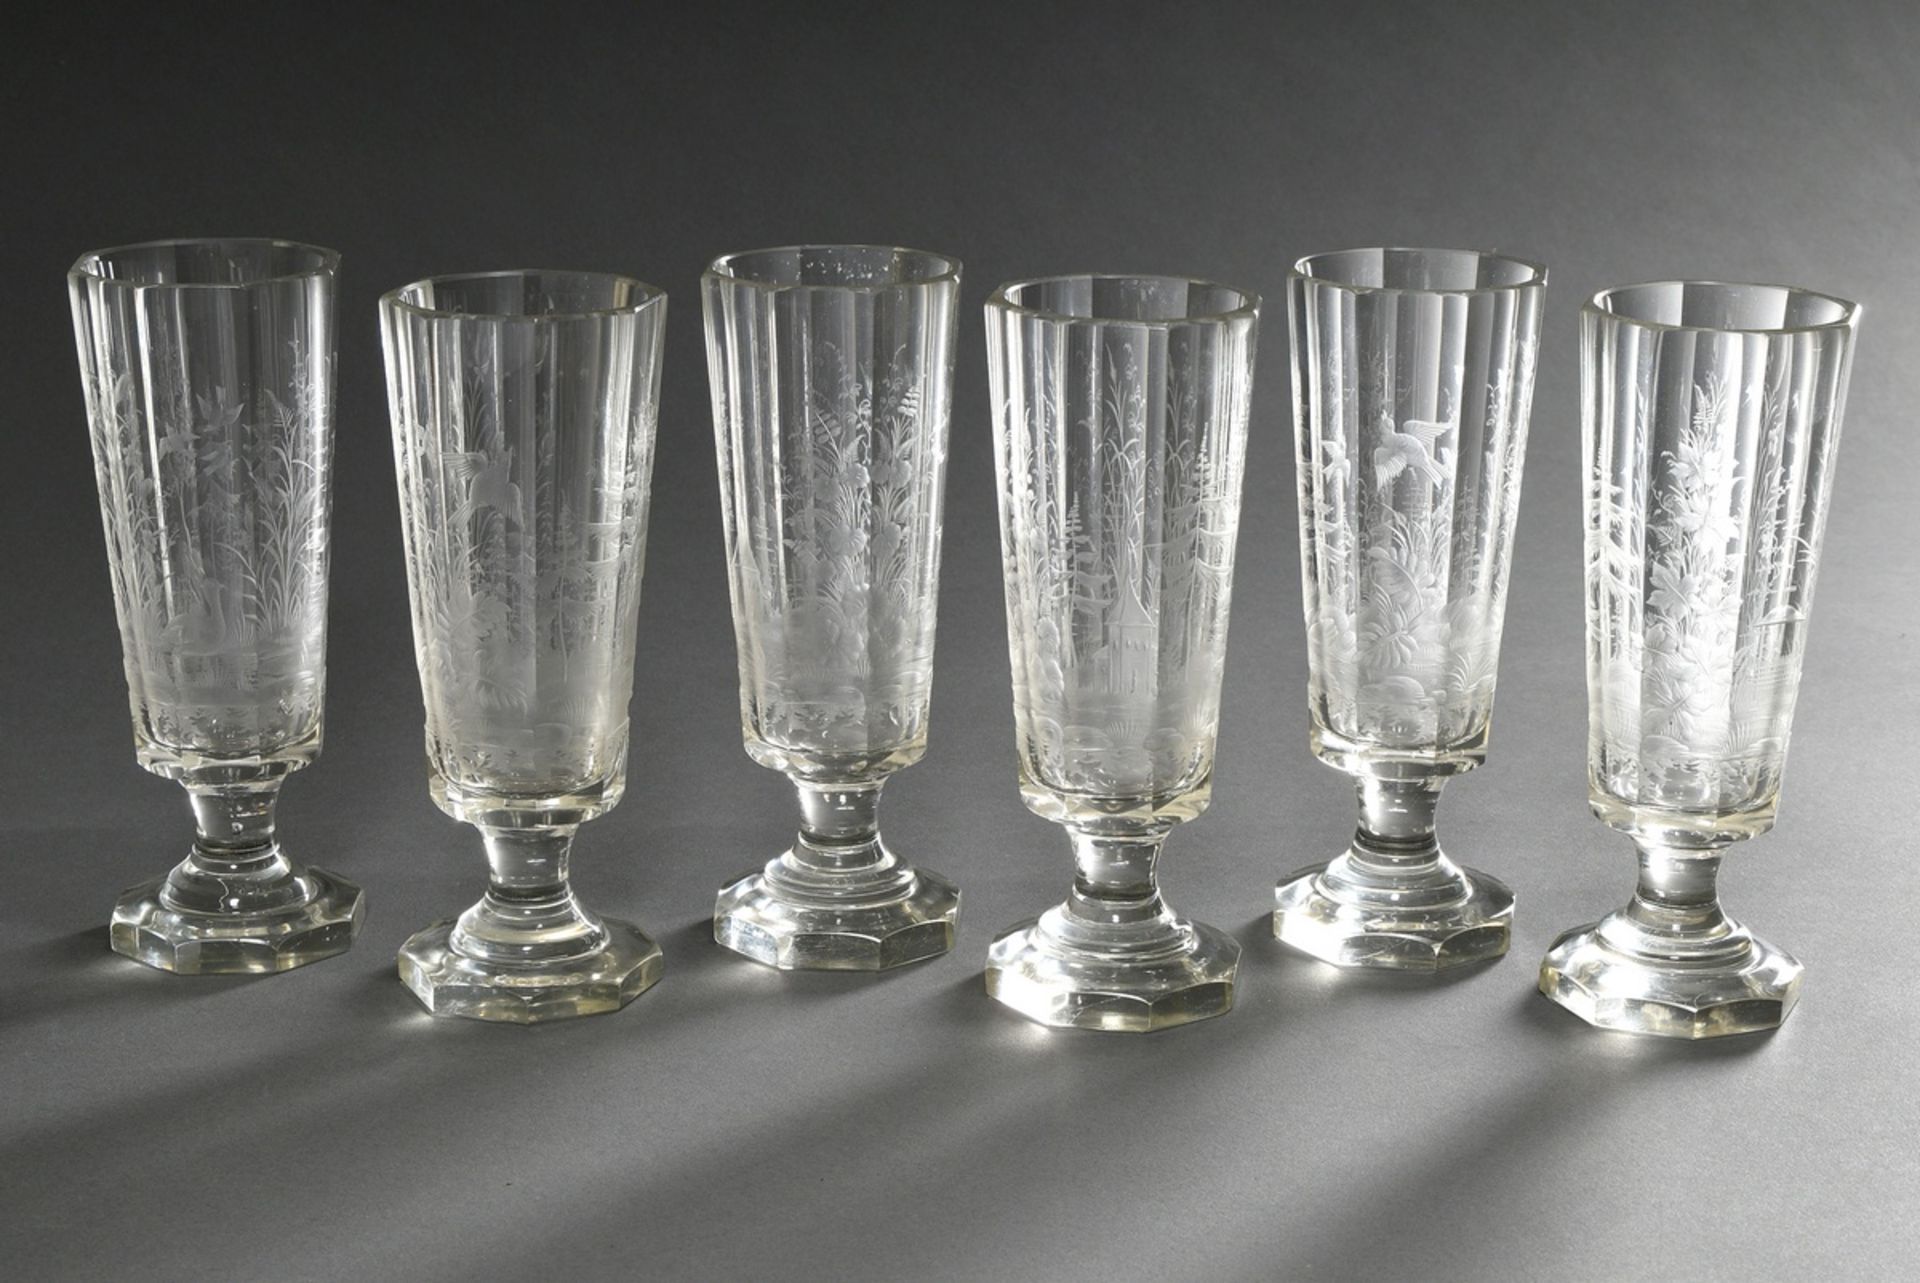 6 tall glasses with faceted walls and fine deep cut decoration "Wild birds in forest landscapes", a